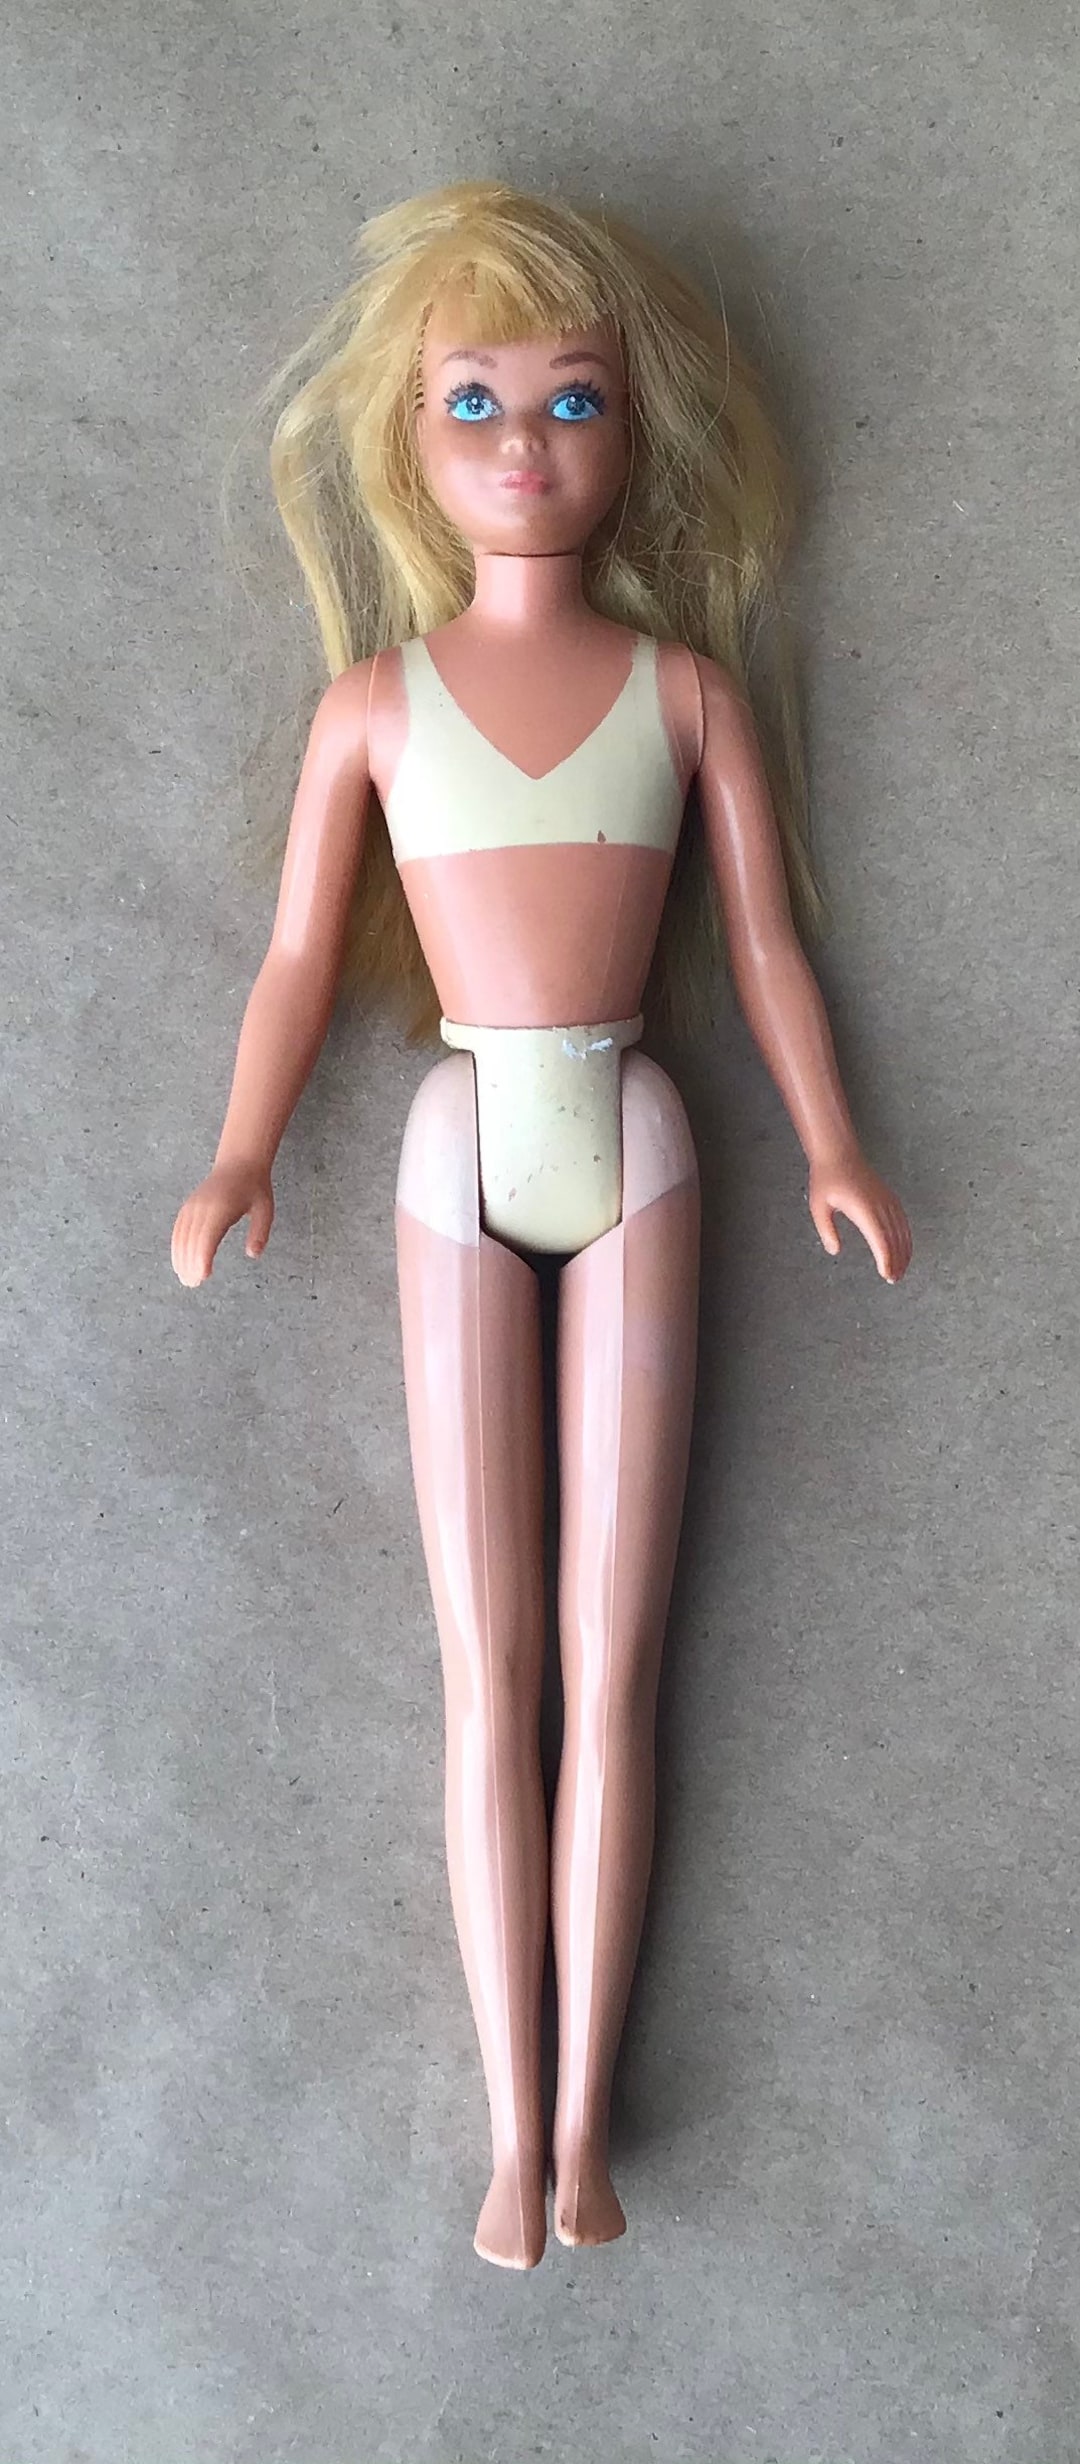 1967 Mattel Inc. Barbie Skipper Doll, Made in the Philippines, 9